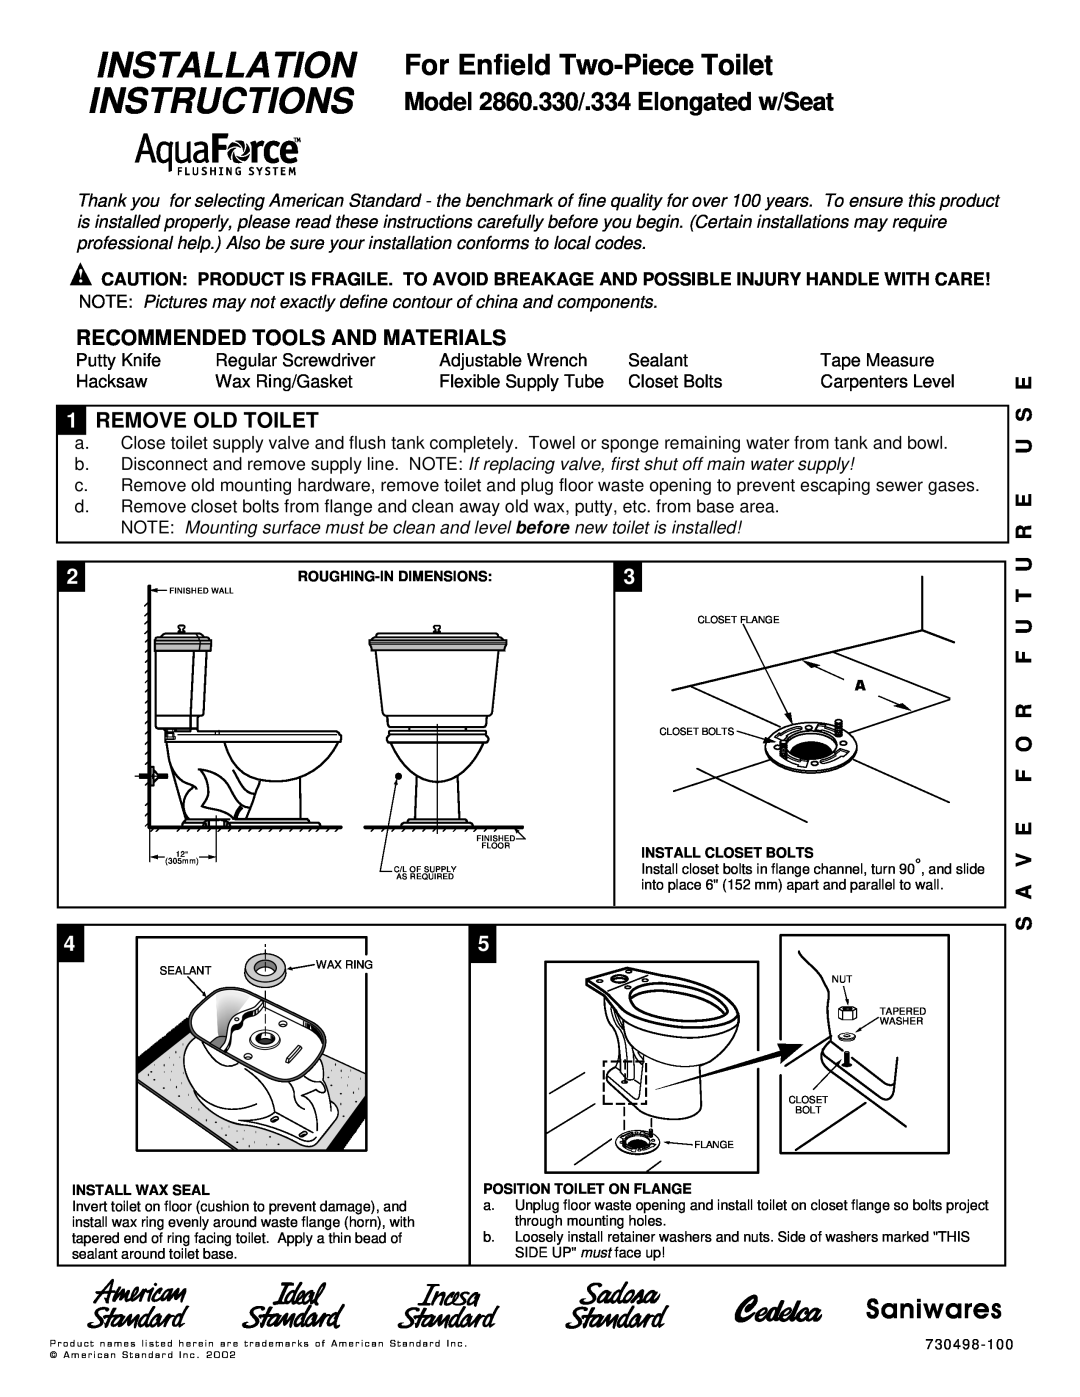 American Standard 2860.330 installation instructions Recommended Tools And Materials, 1REMOVE OLD TOILET, U R E U S E 